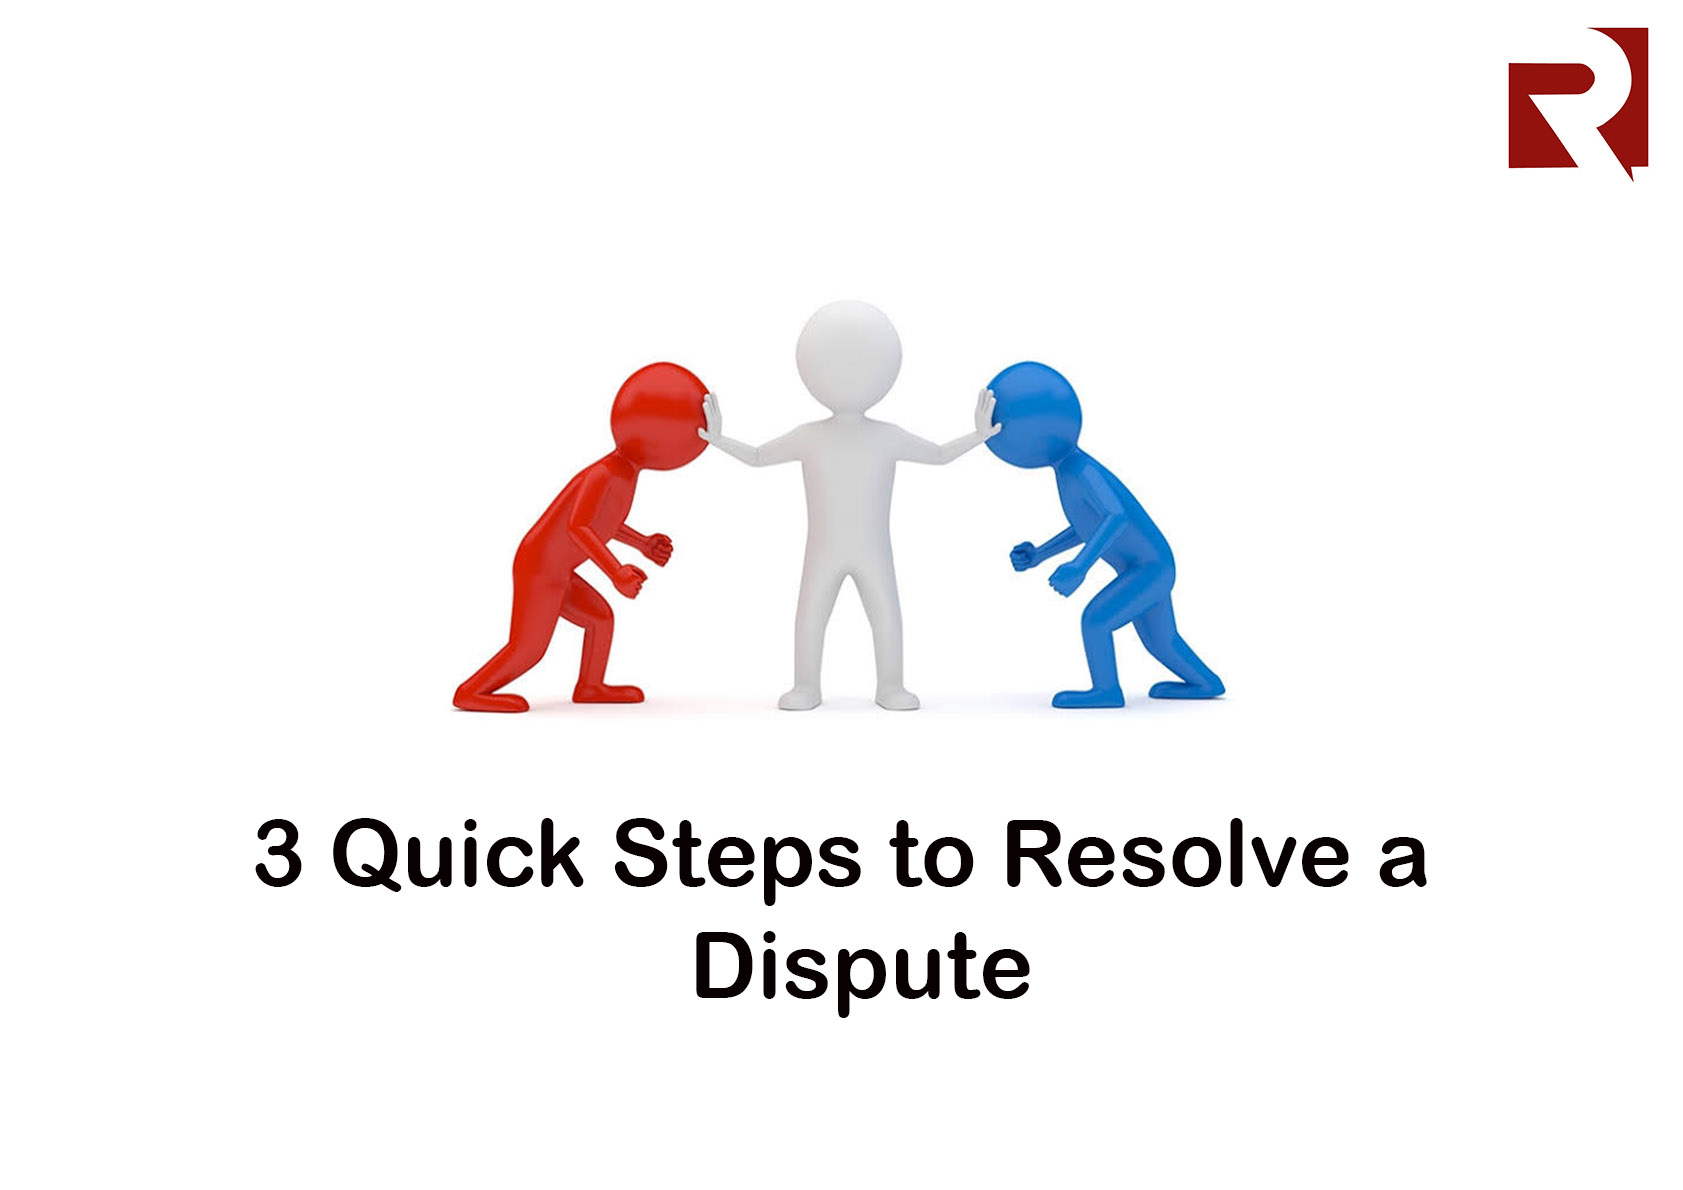 3 Quick Steps to Resolve a Dispute